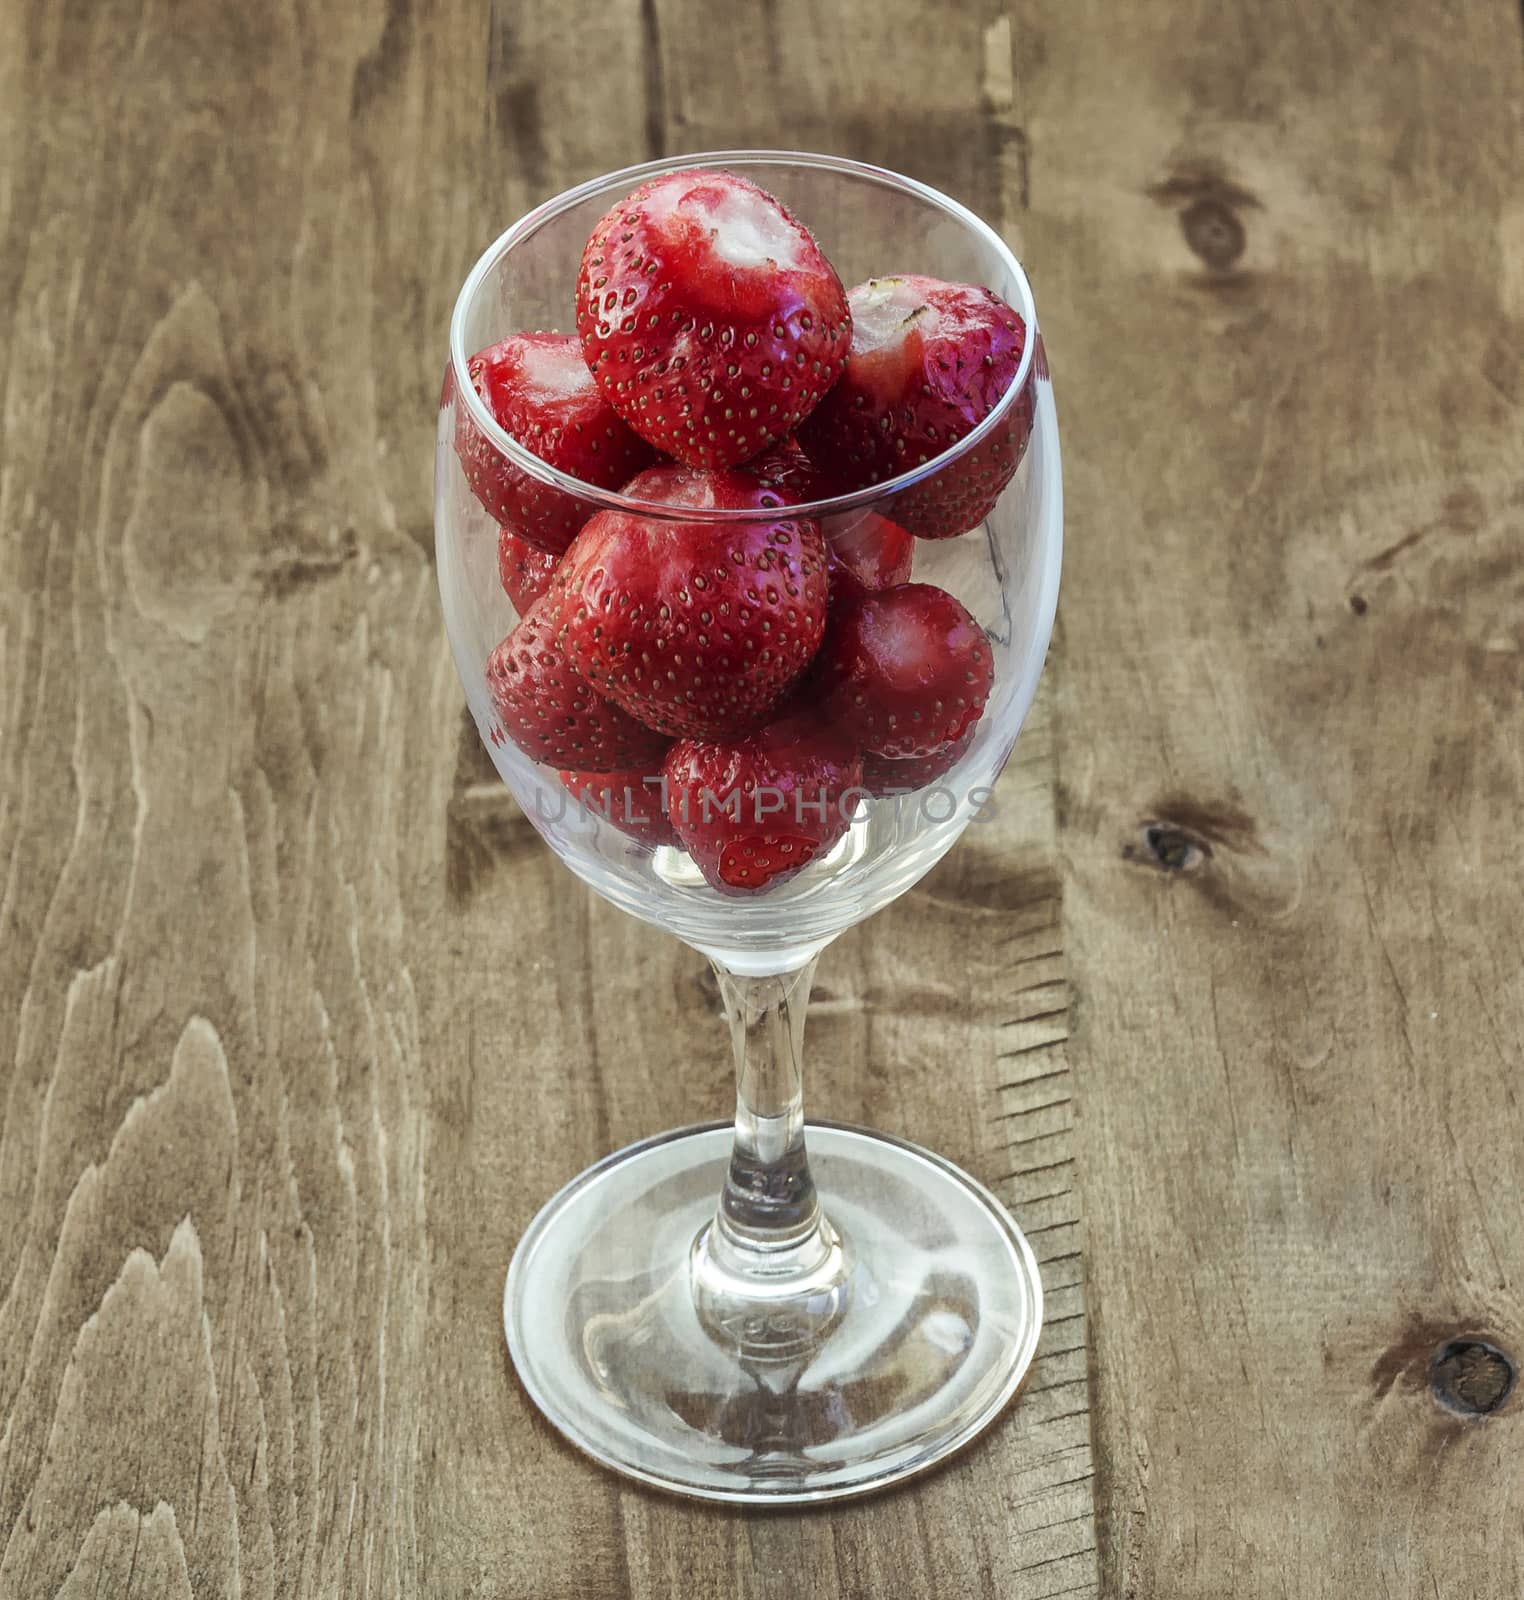 Berry strawberries in a glass fouger on a wooden surface by Grommik